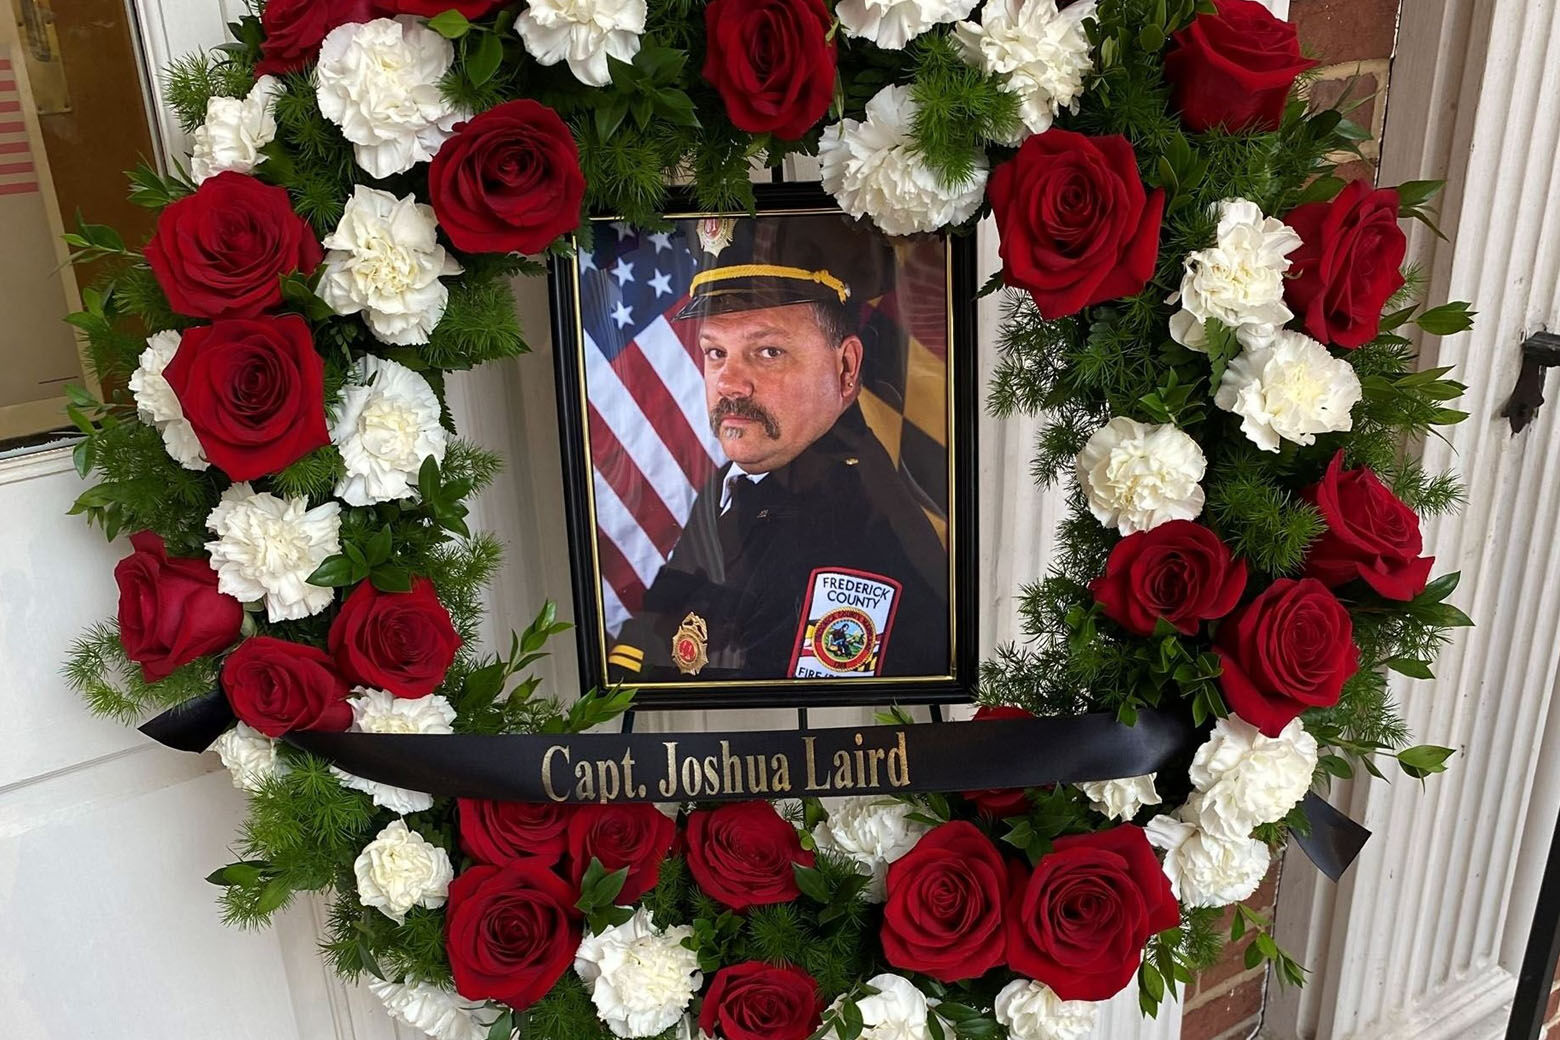 Capt. Joshua Laird, 46, who was posthumously promoted to the rank of battalion chief, died fighting a two-alarm house fire in Ijamsville Aug. 11, 2021. (Courtesy Frederick County government)